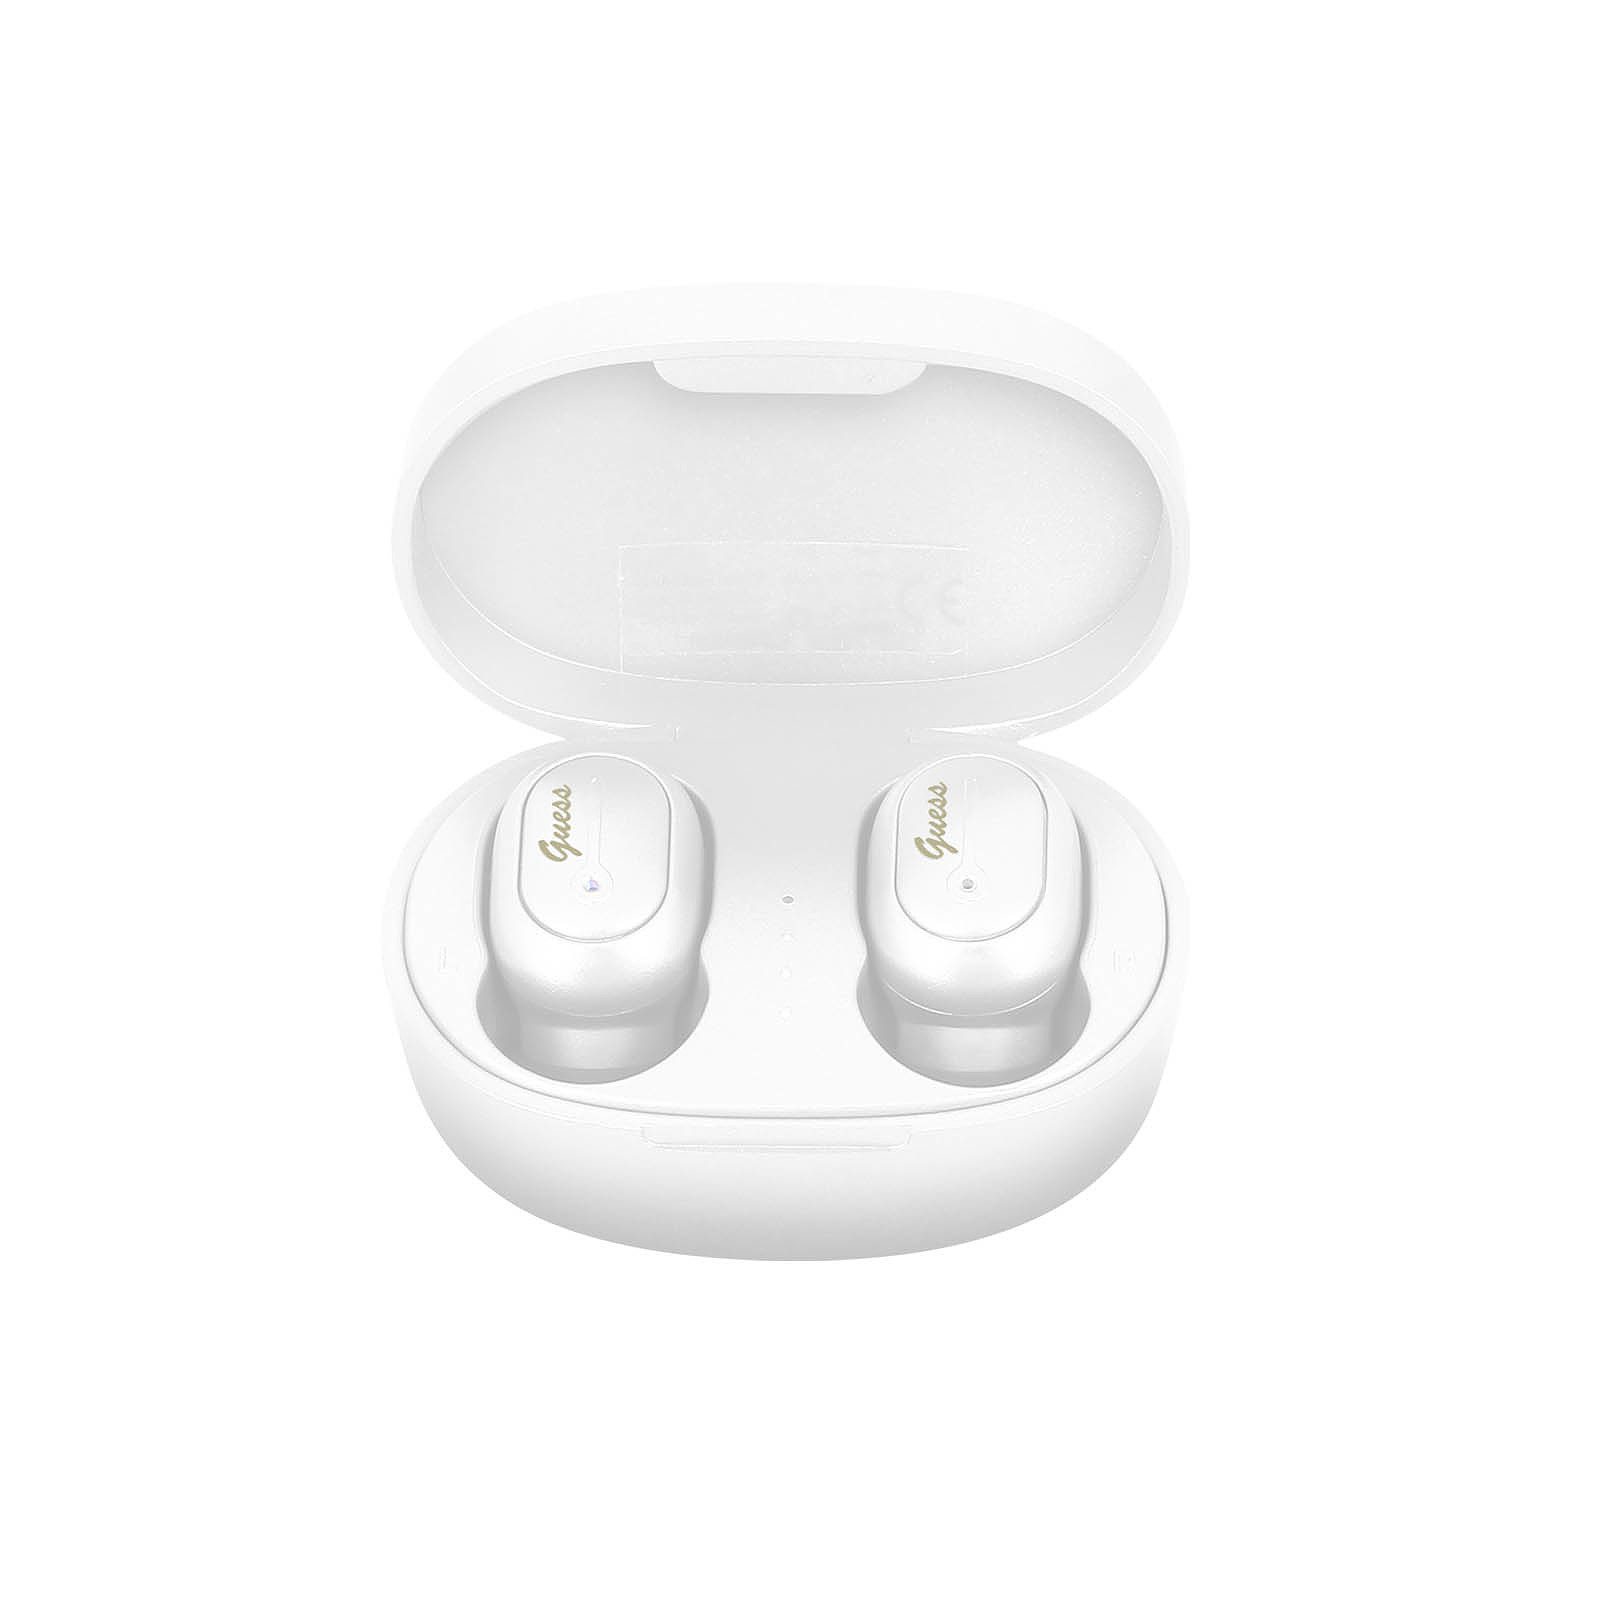 GUESS acouteurs Sans-fil Bluetooth Reduction du Bruit Autonomie 12H IPX4 Blanc - Kit pieton et Casque GUESS